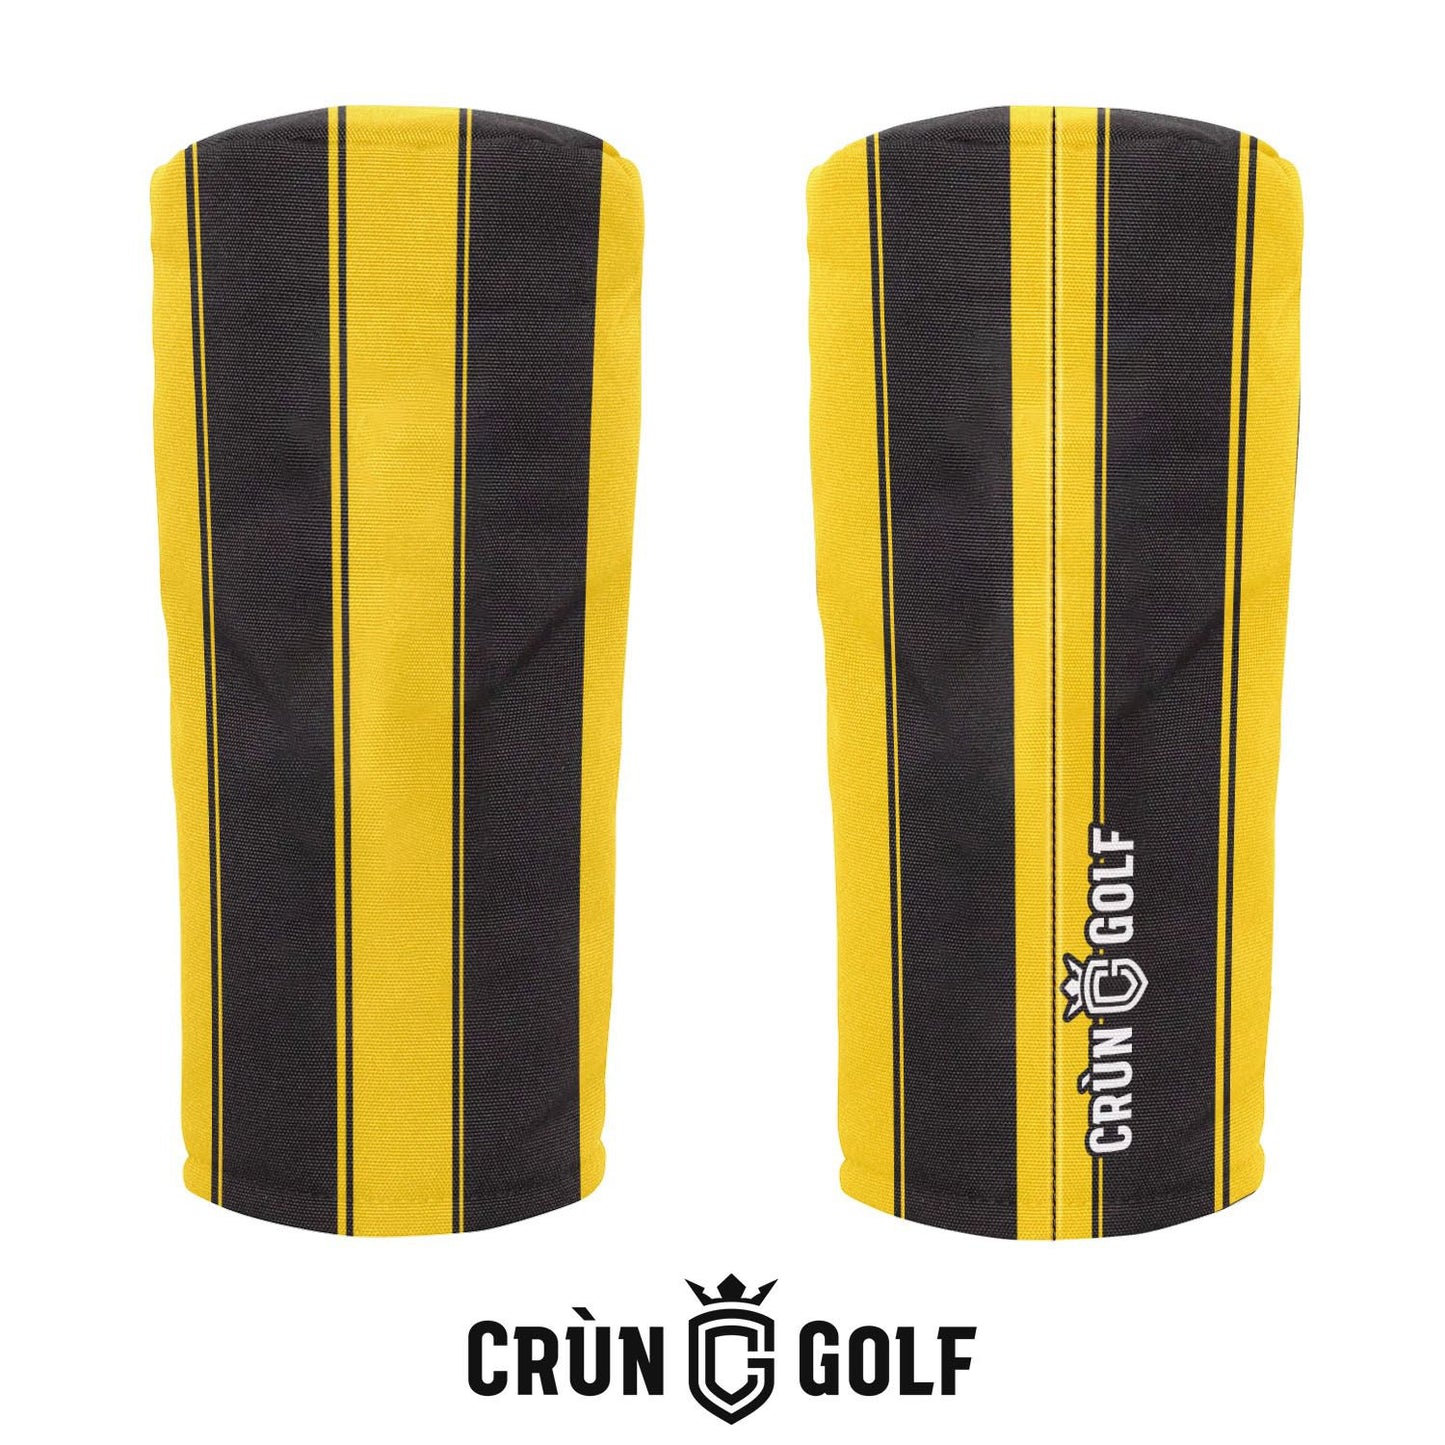 Black & Golds Headcover - 1998 Home